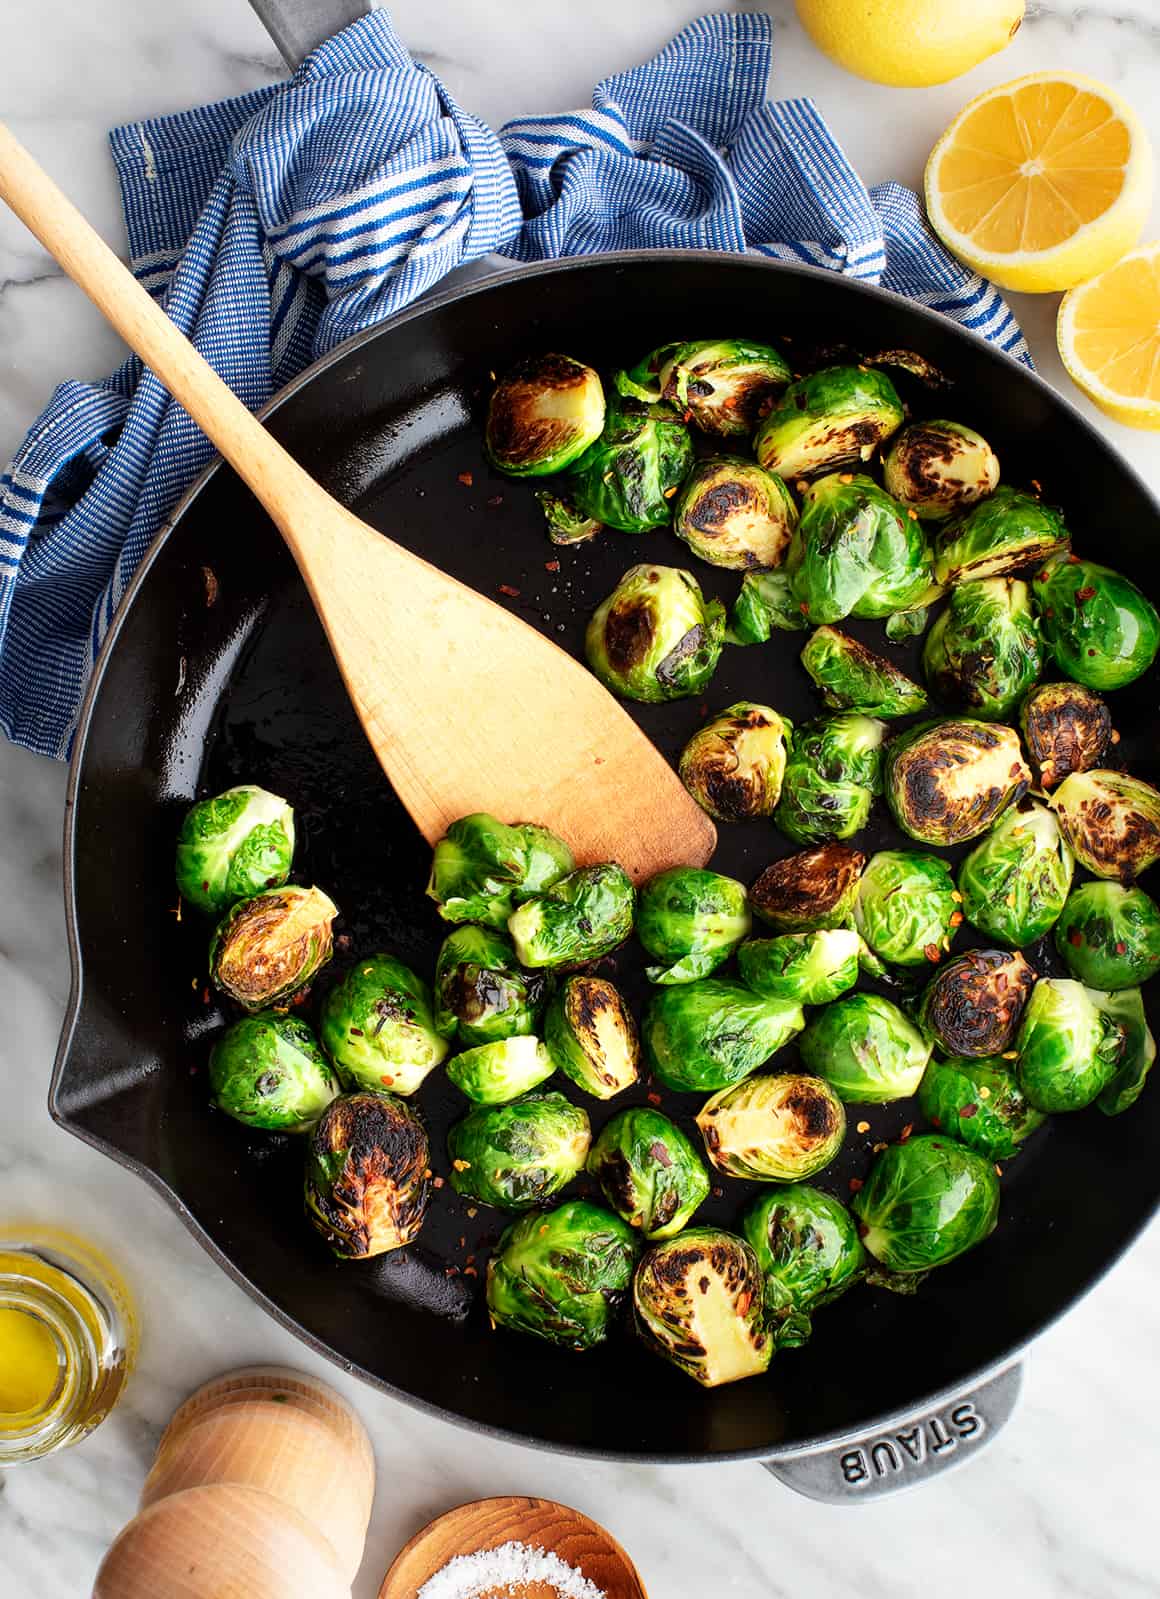 Sautéed Brussels sprouts